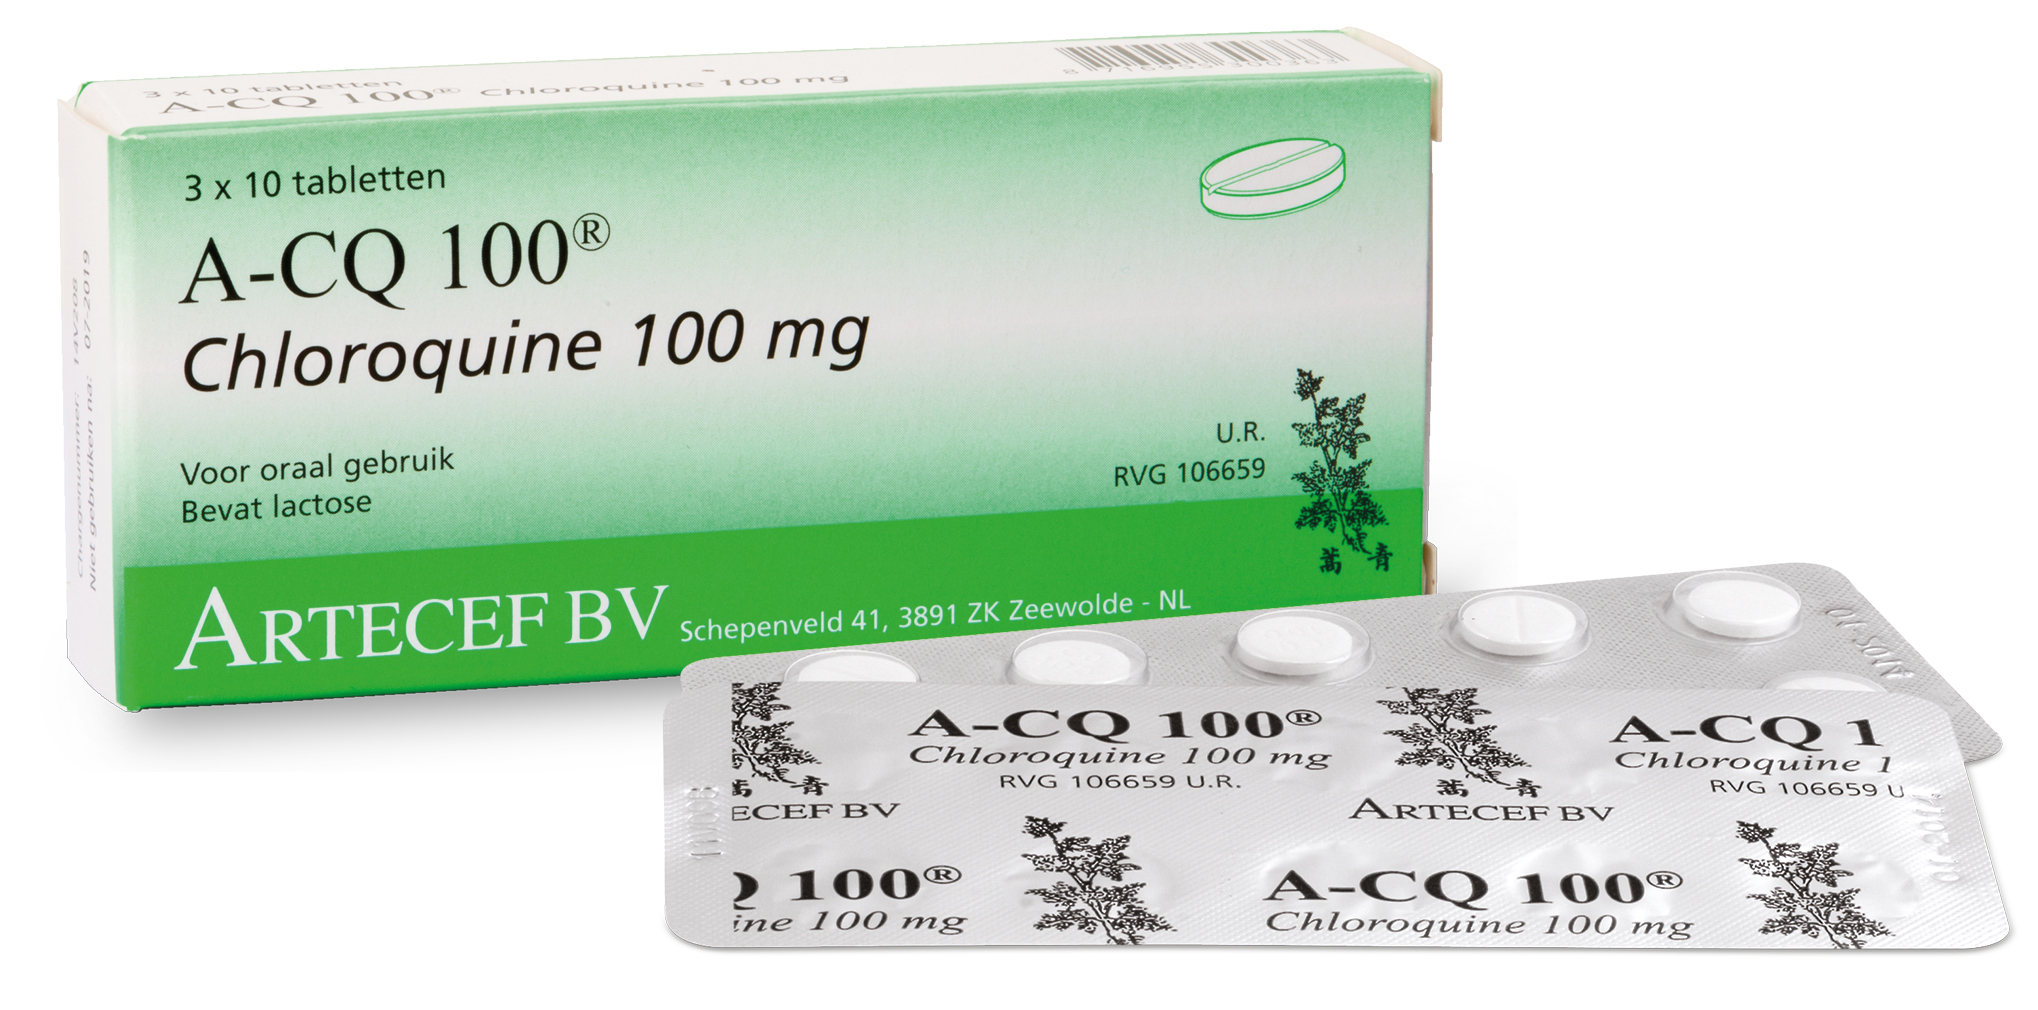 Preliminary results from a study on Chloroquine by Fiocruz and the Tropical Medicine Foundation showed that mortality among the group of Covid-19 patients tested, in critical condition, was 13 percent.